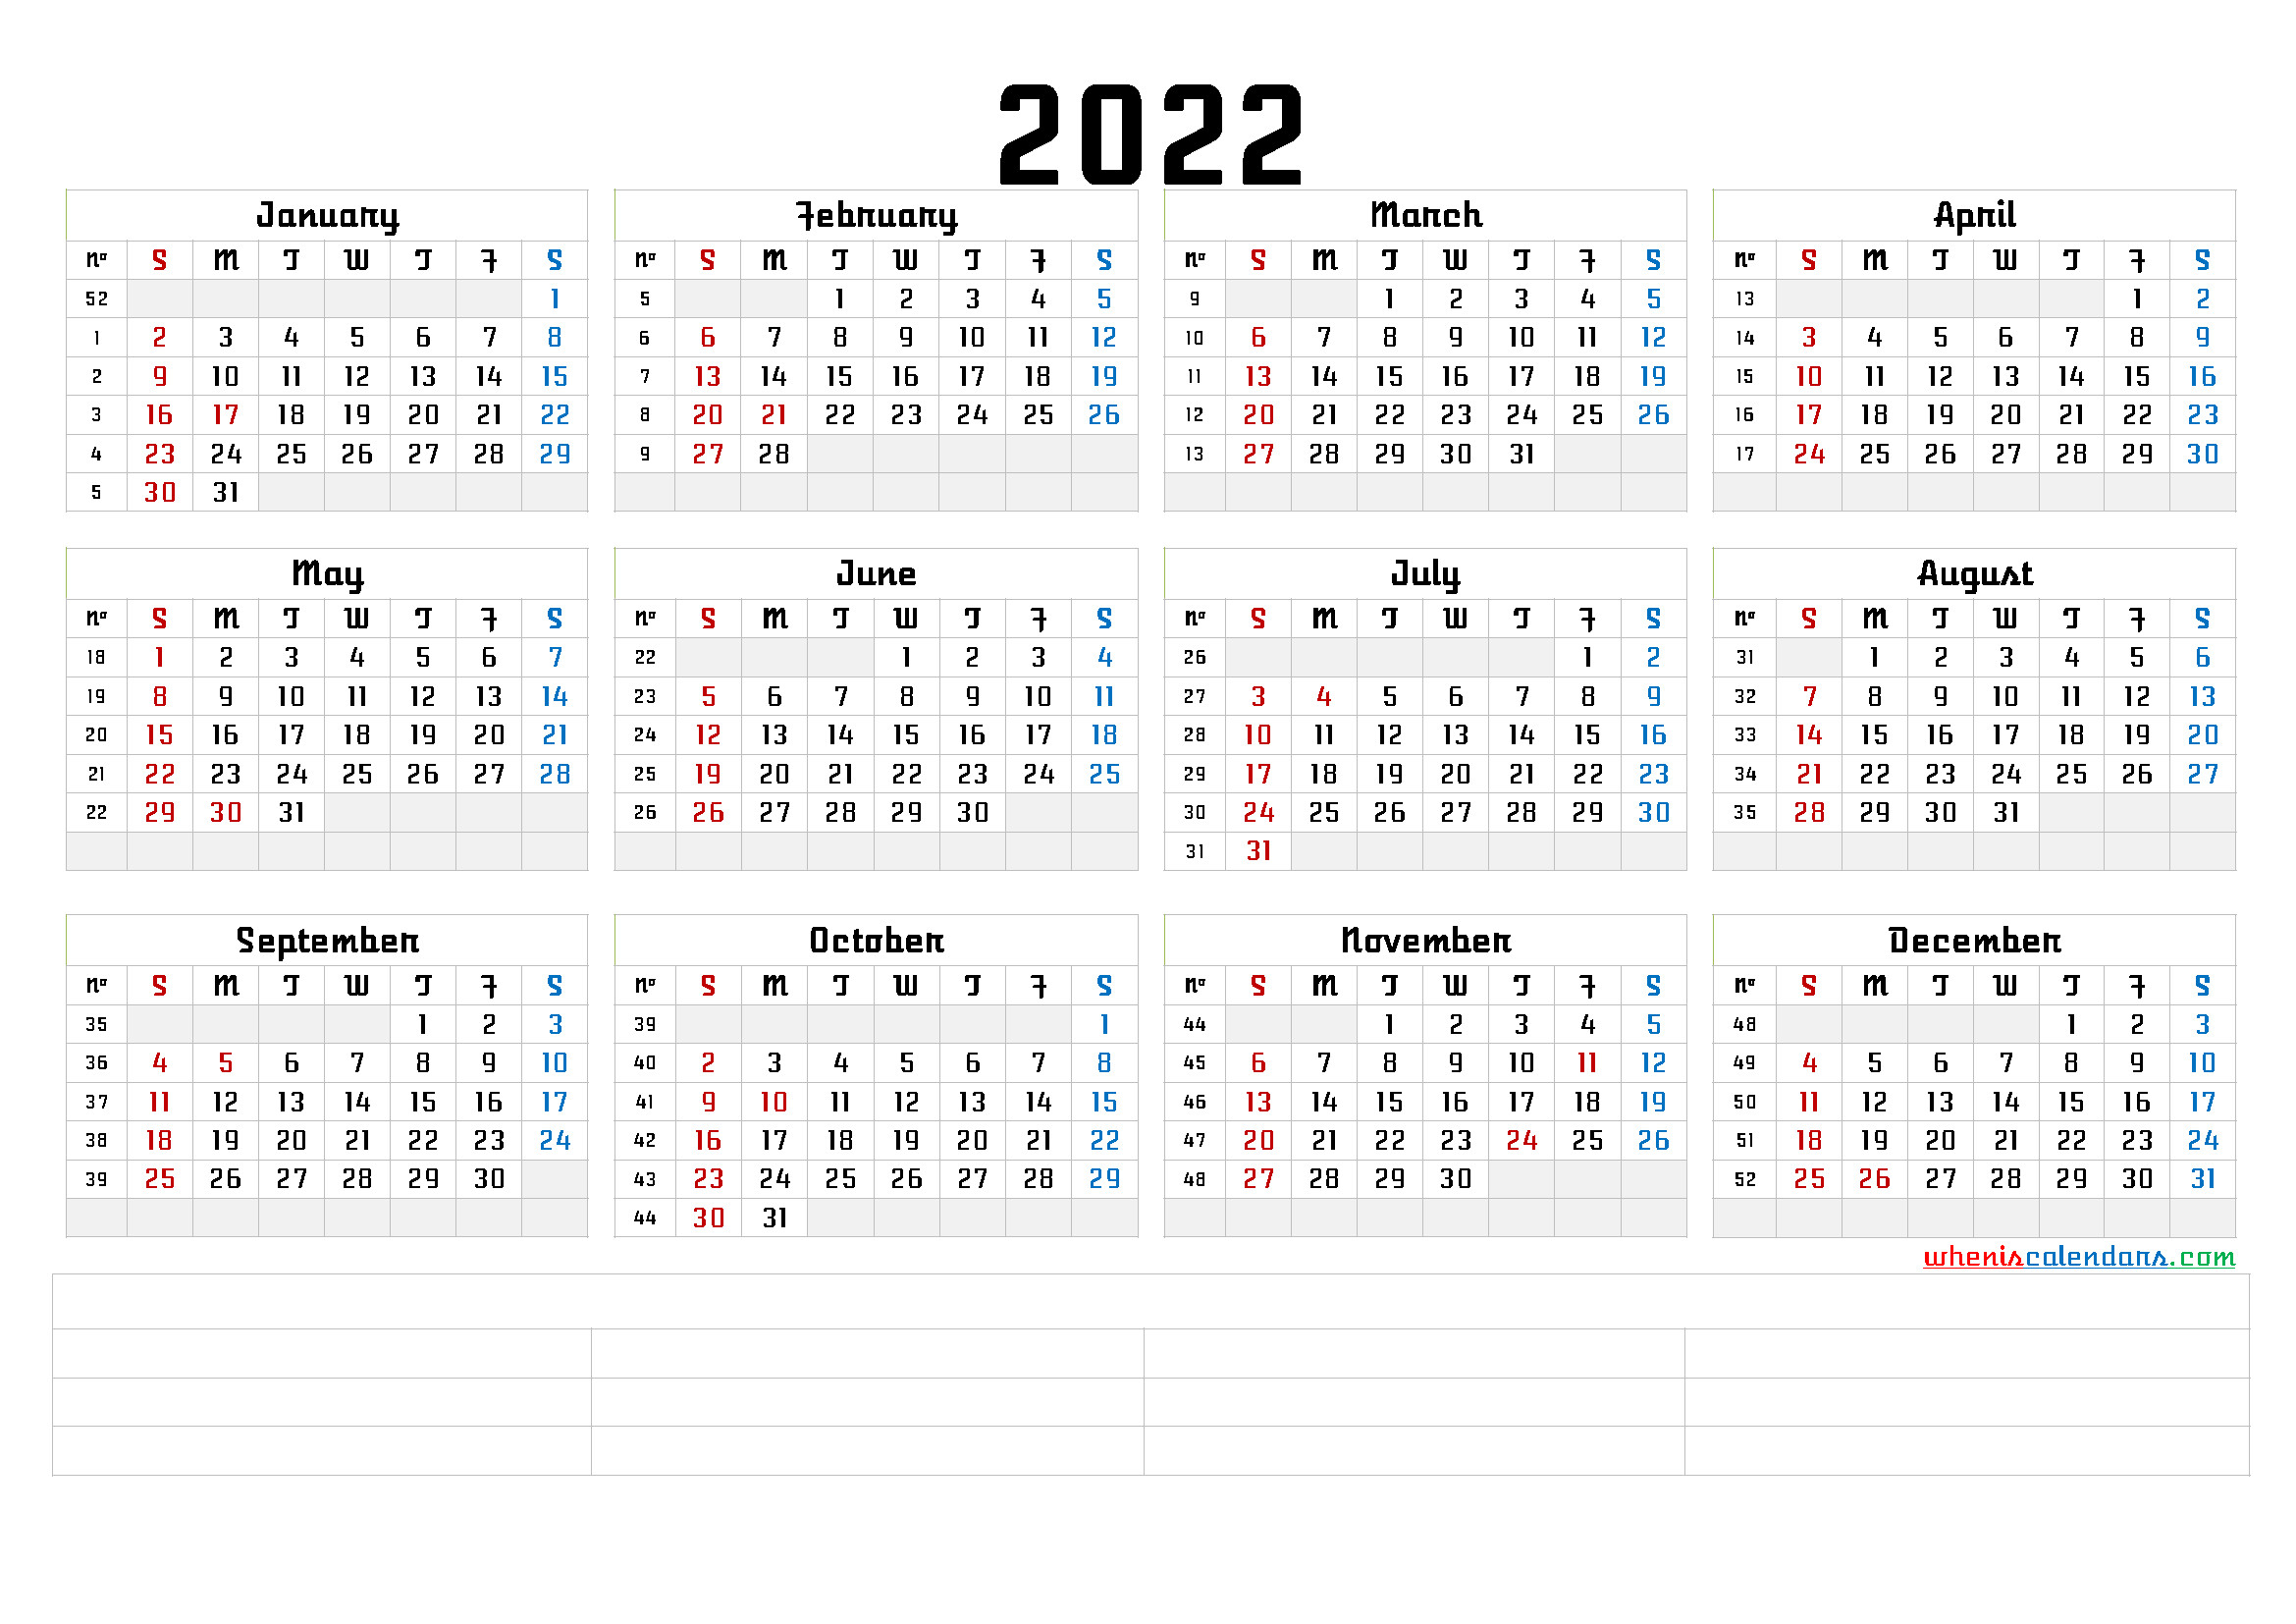 2022 Yearly Calendar Template Word - Calendraex-Time And Date Calendar 2022 Printable